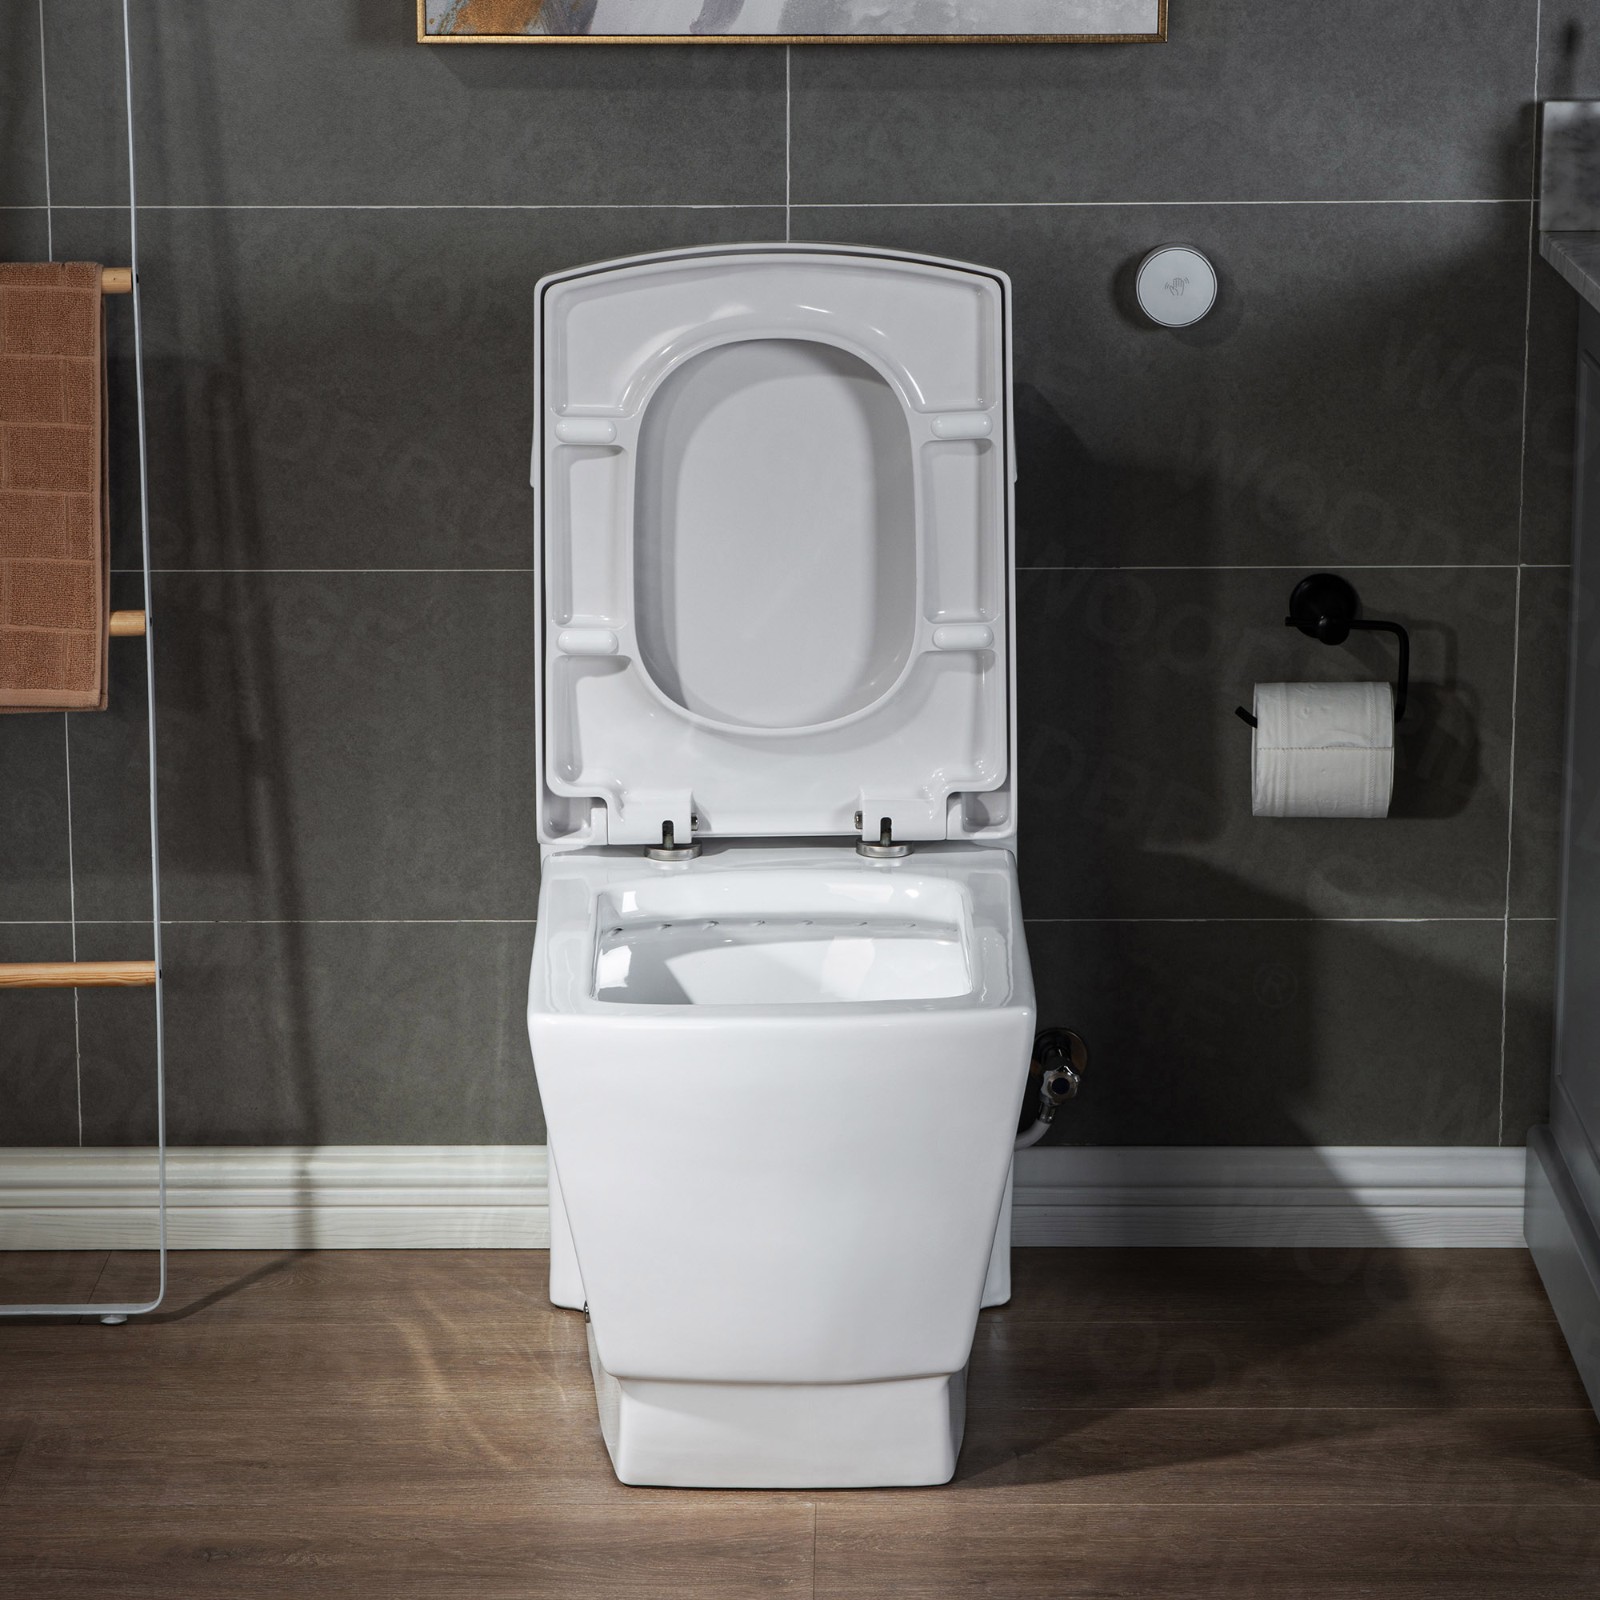  WOODBRIDGE B-0920-A Modern One-Piece Elongated Square toilet with Solf Closed Seat and Hand Free Touchless Sensor Flush Kit, White_5459